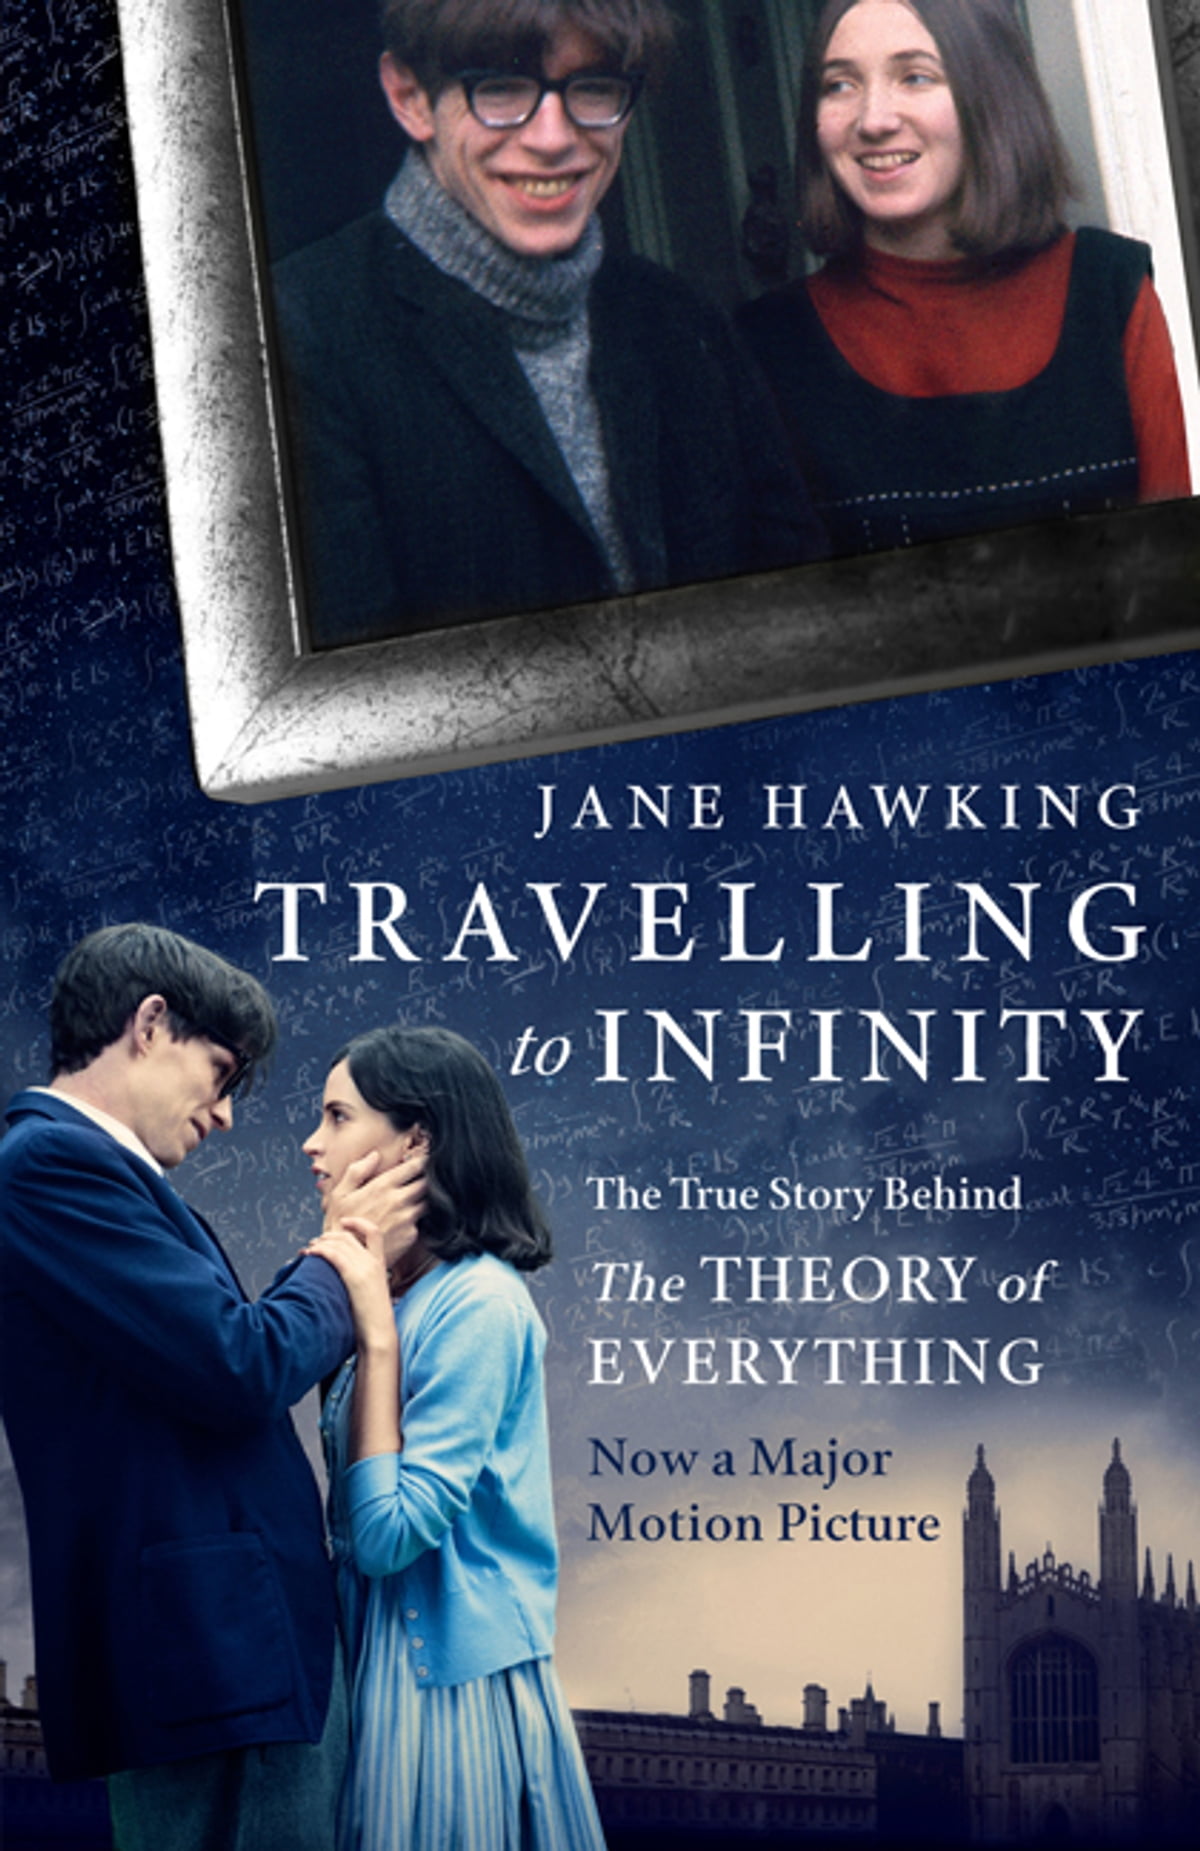 Traveling to infinity